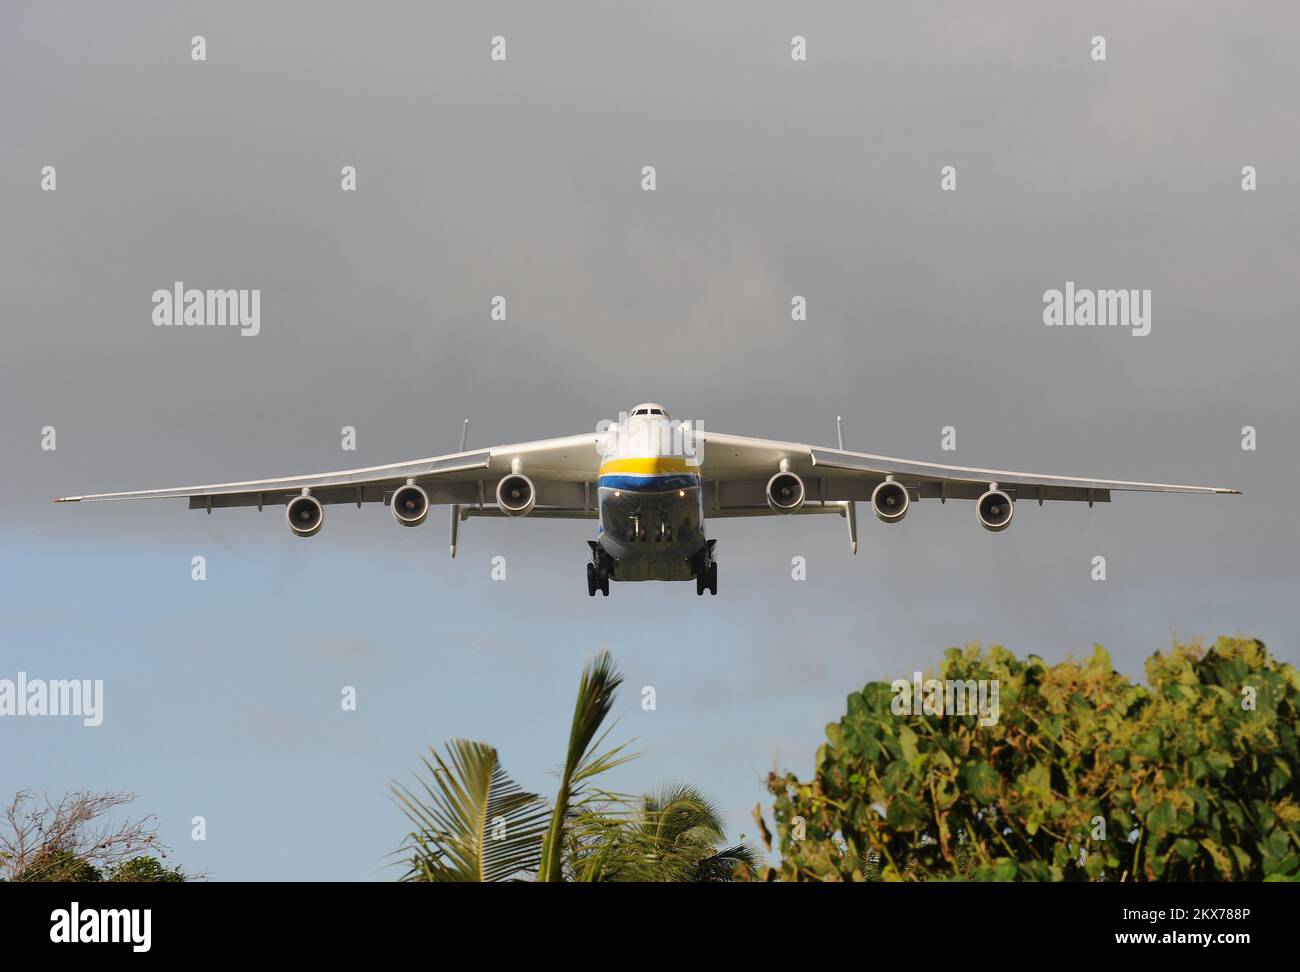 Antonov Cargo Plane Arrives in American Samoa Carrying Generator. American Samoa Earthquake, Tsunami, and Flooding. Photographs Relating to Disasters and Emergency Management Programs, Activities, and Officials Stock Photo